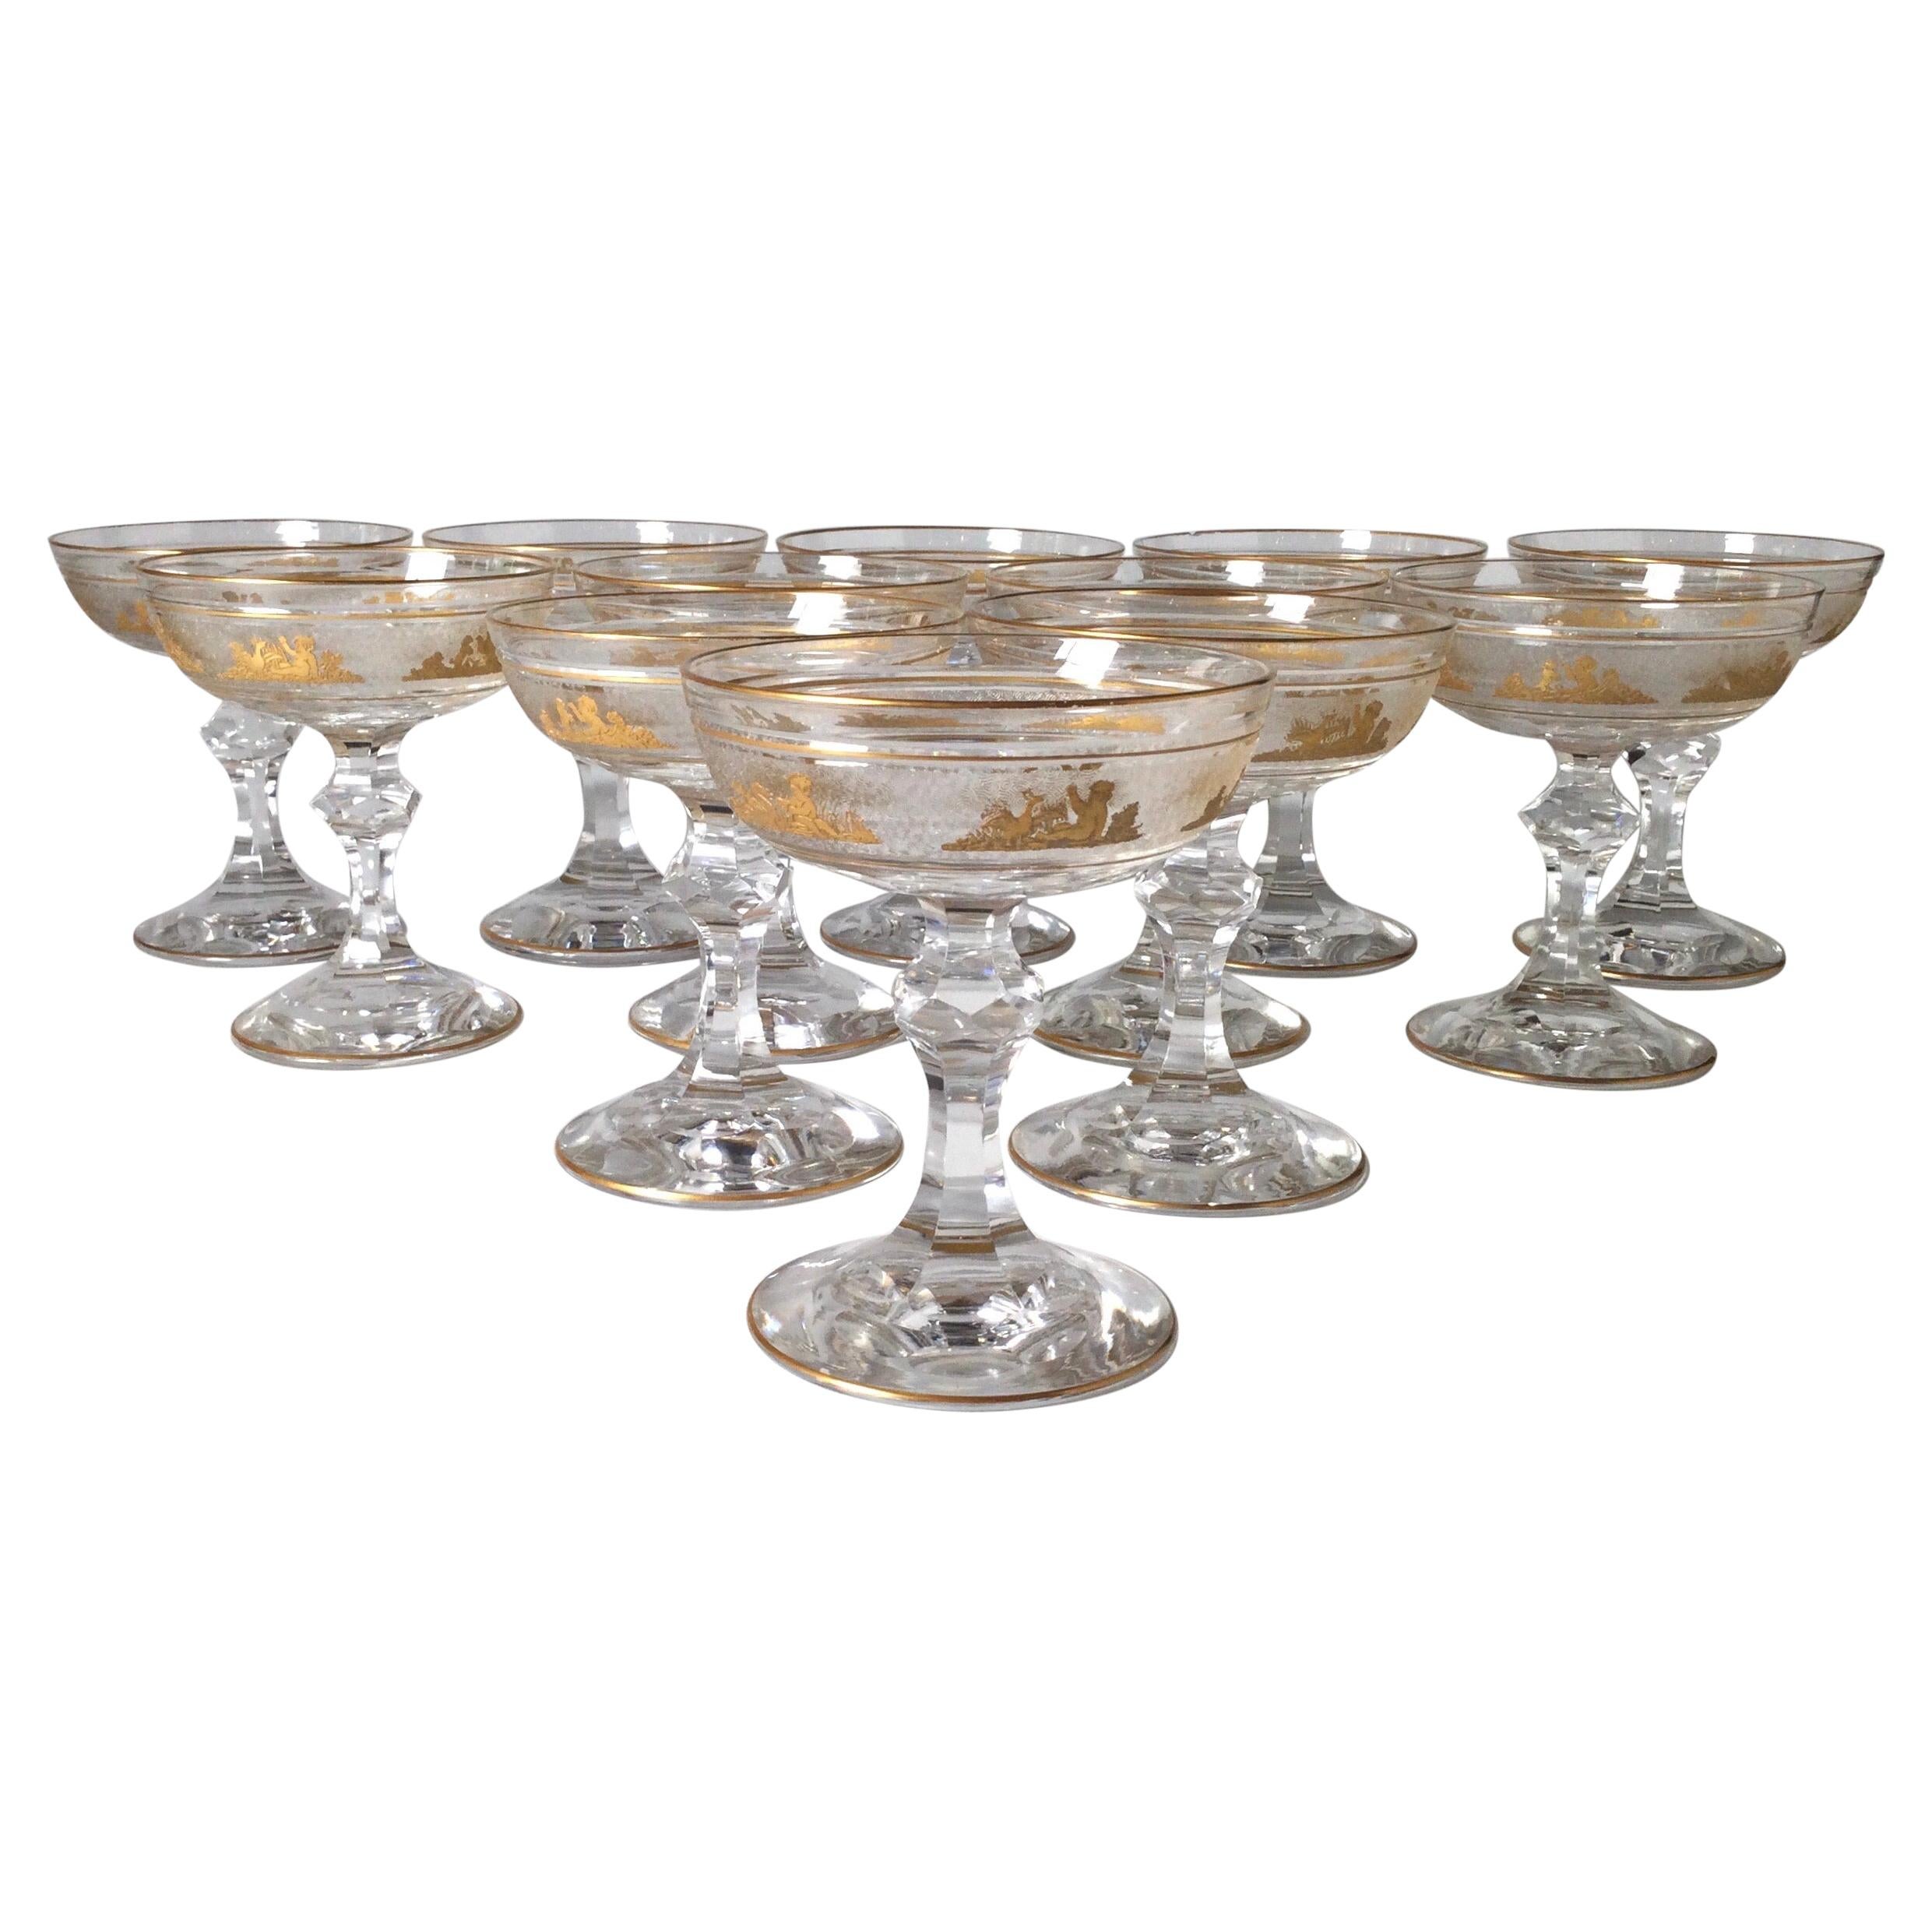 A Magnificent Set of 12 Champagne Glasses Made By Val St. Lambert, Panel Cut